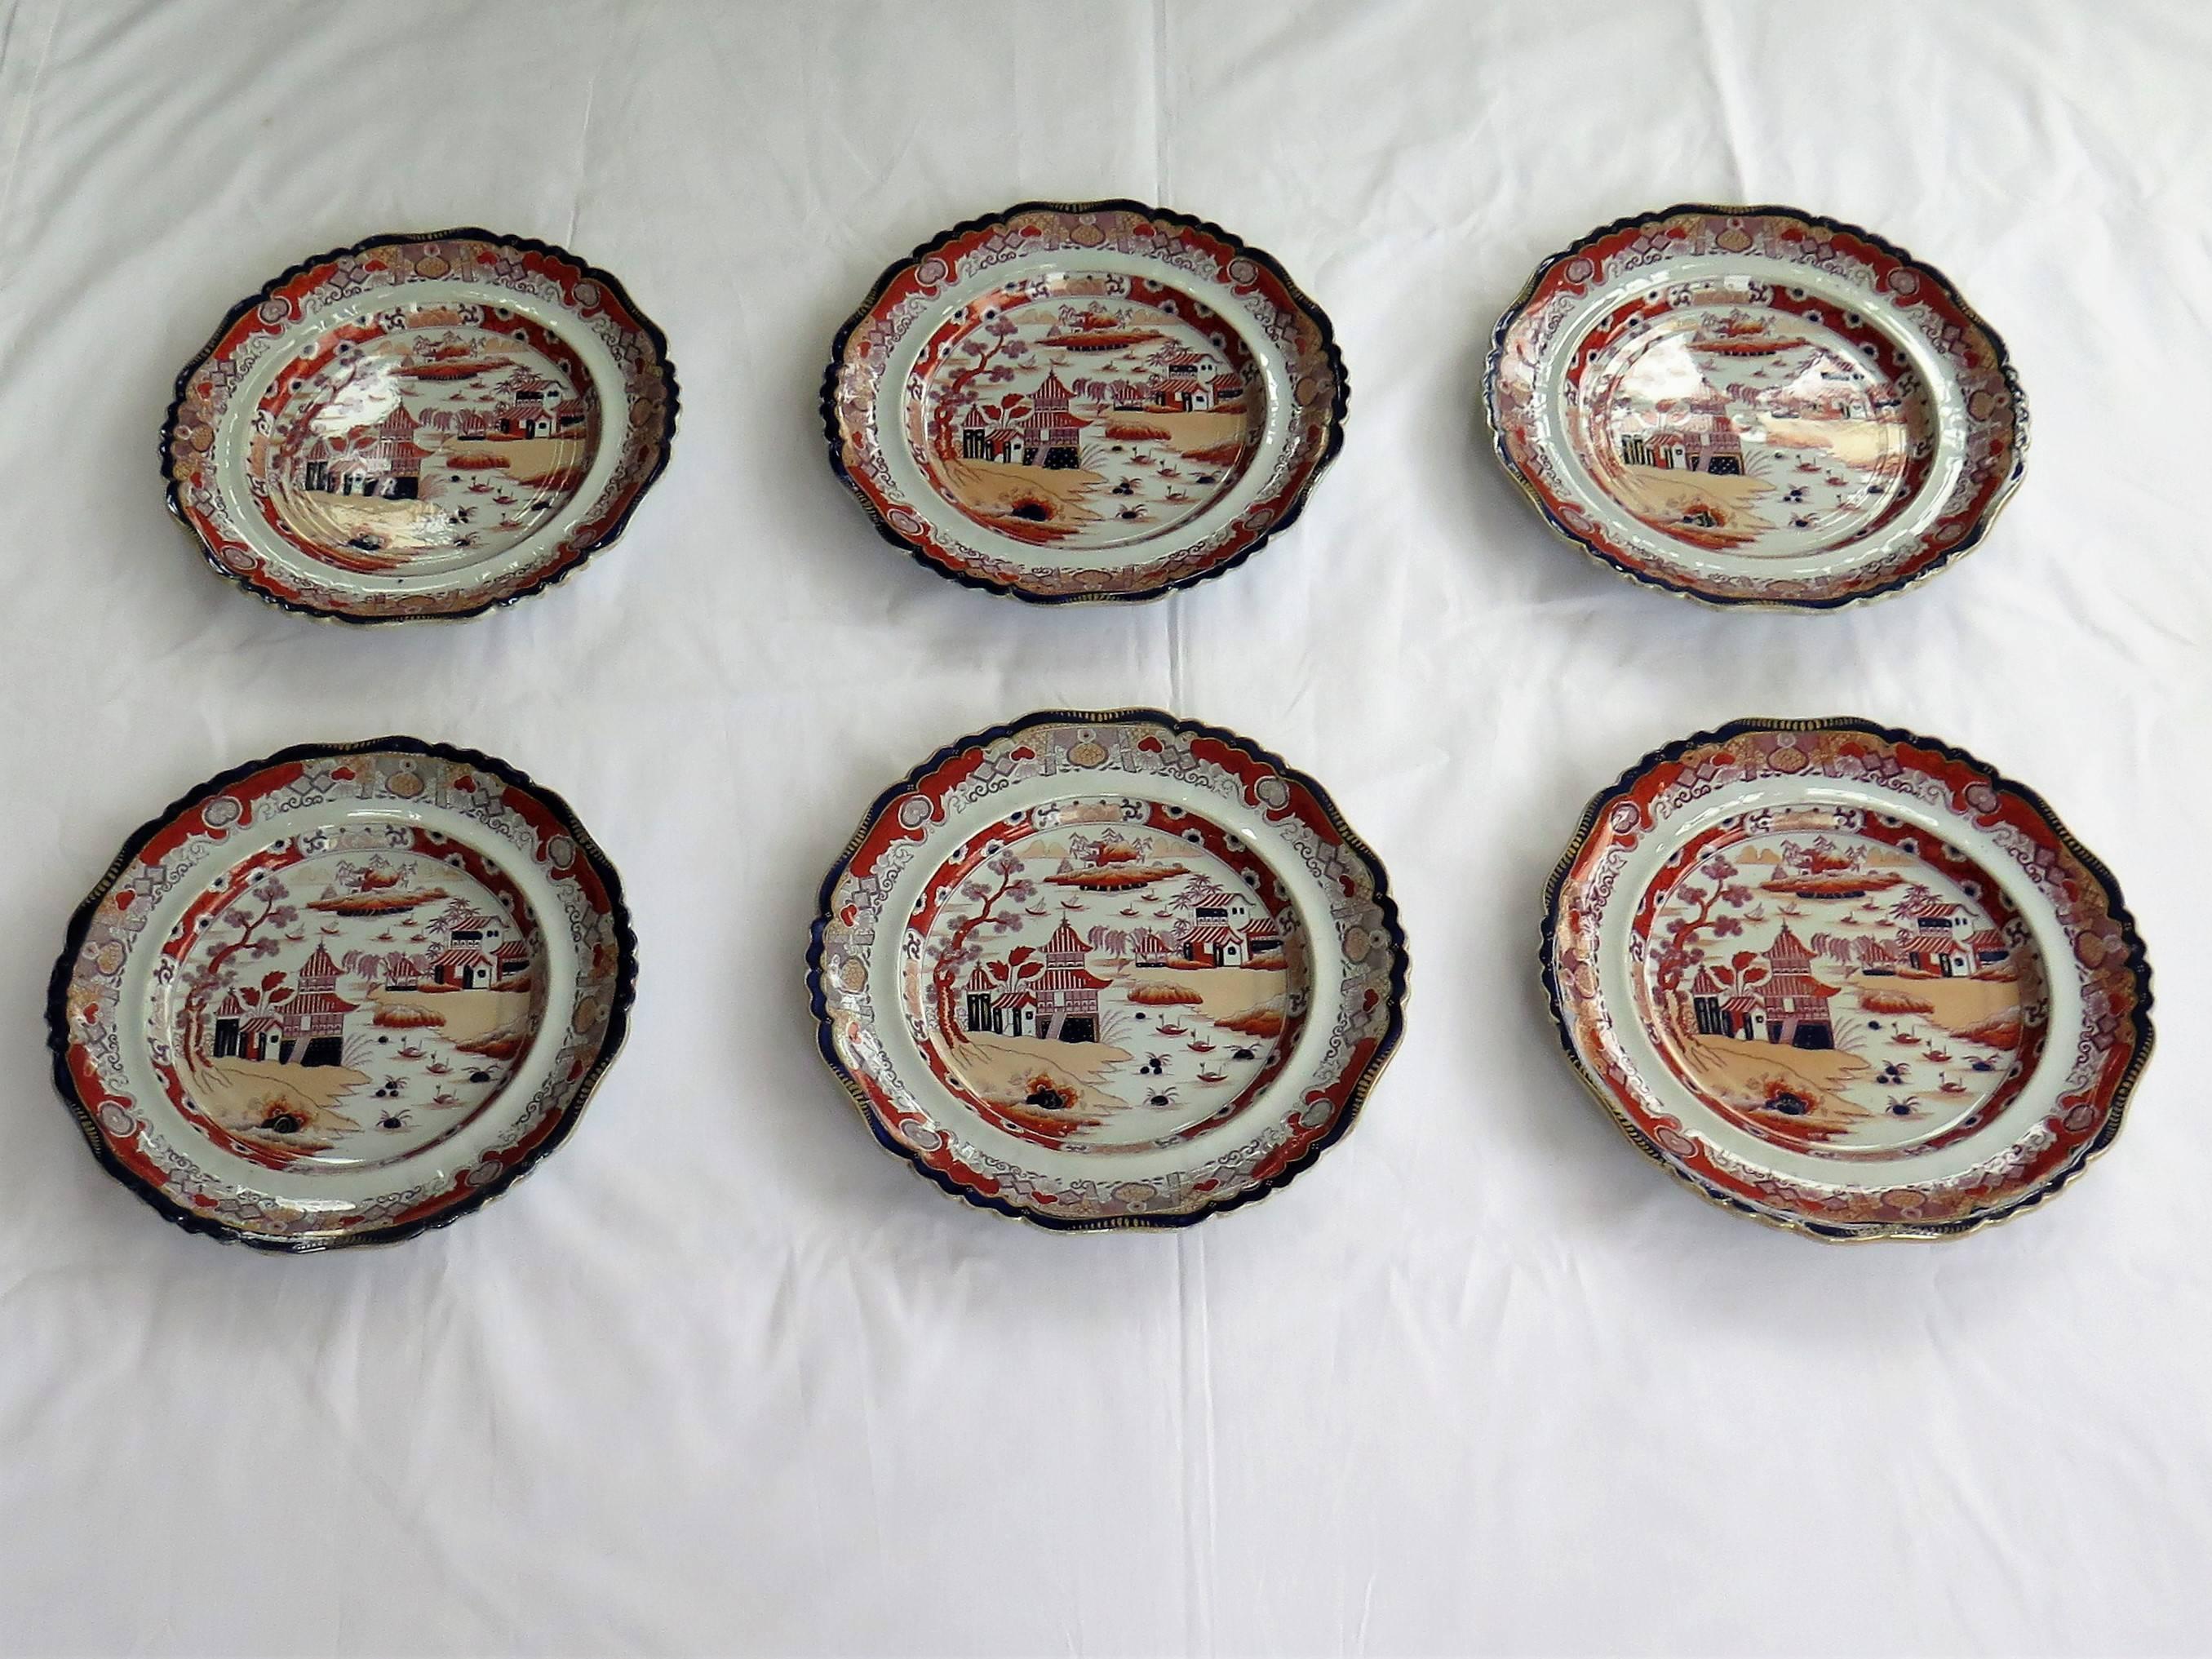 These are a beautiful set of SIX Large Dinner Plates by Mason's ironstone made during the mid-19th century, when Mason's was owned by Ashworth Brothers, circa 1865.

These Dinner Plates are well potted and large with a diameter of over 10 inches,